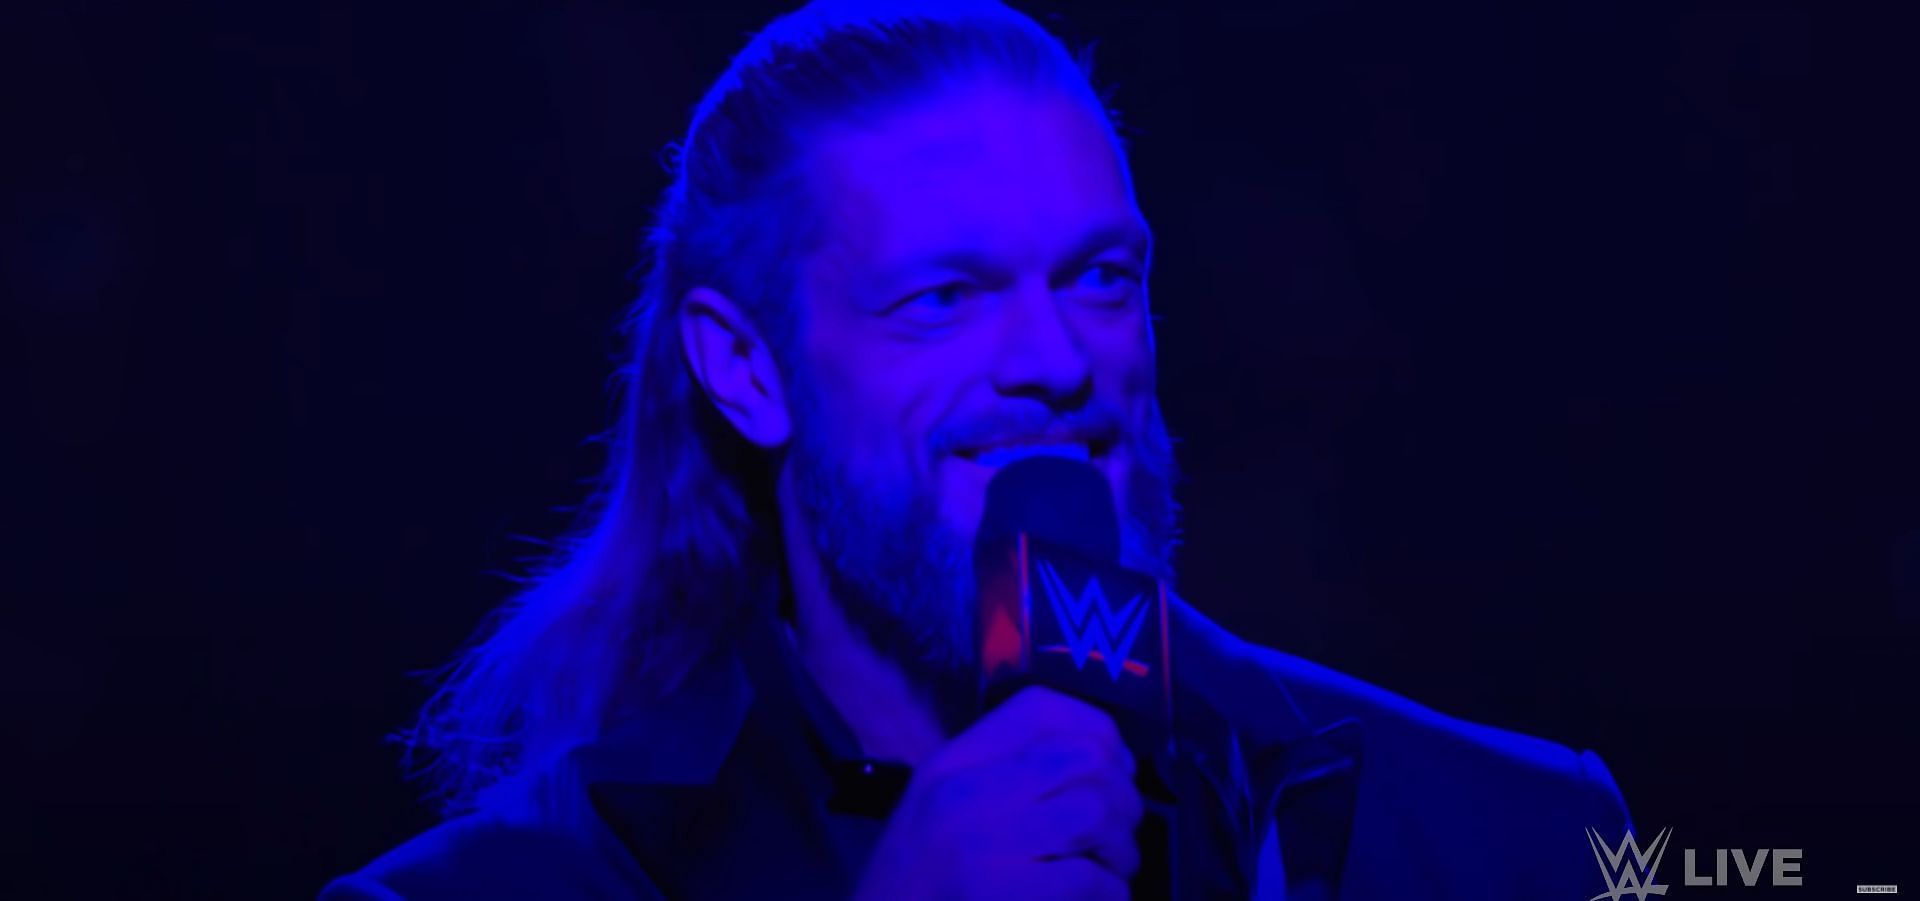 WWE Hall of Famer and legend Edge